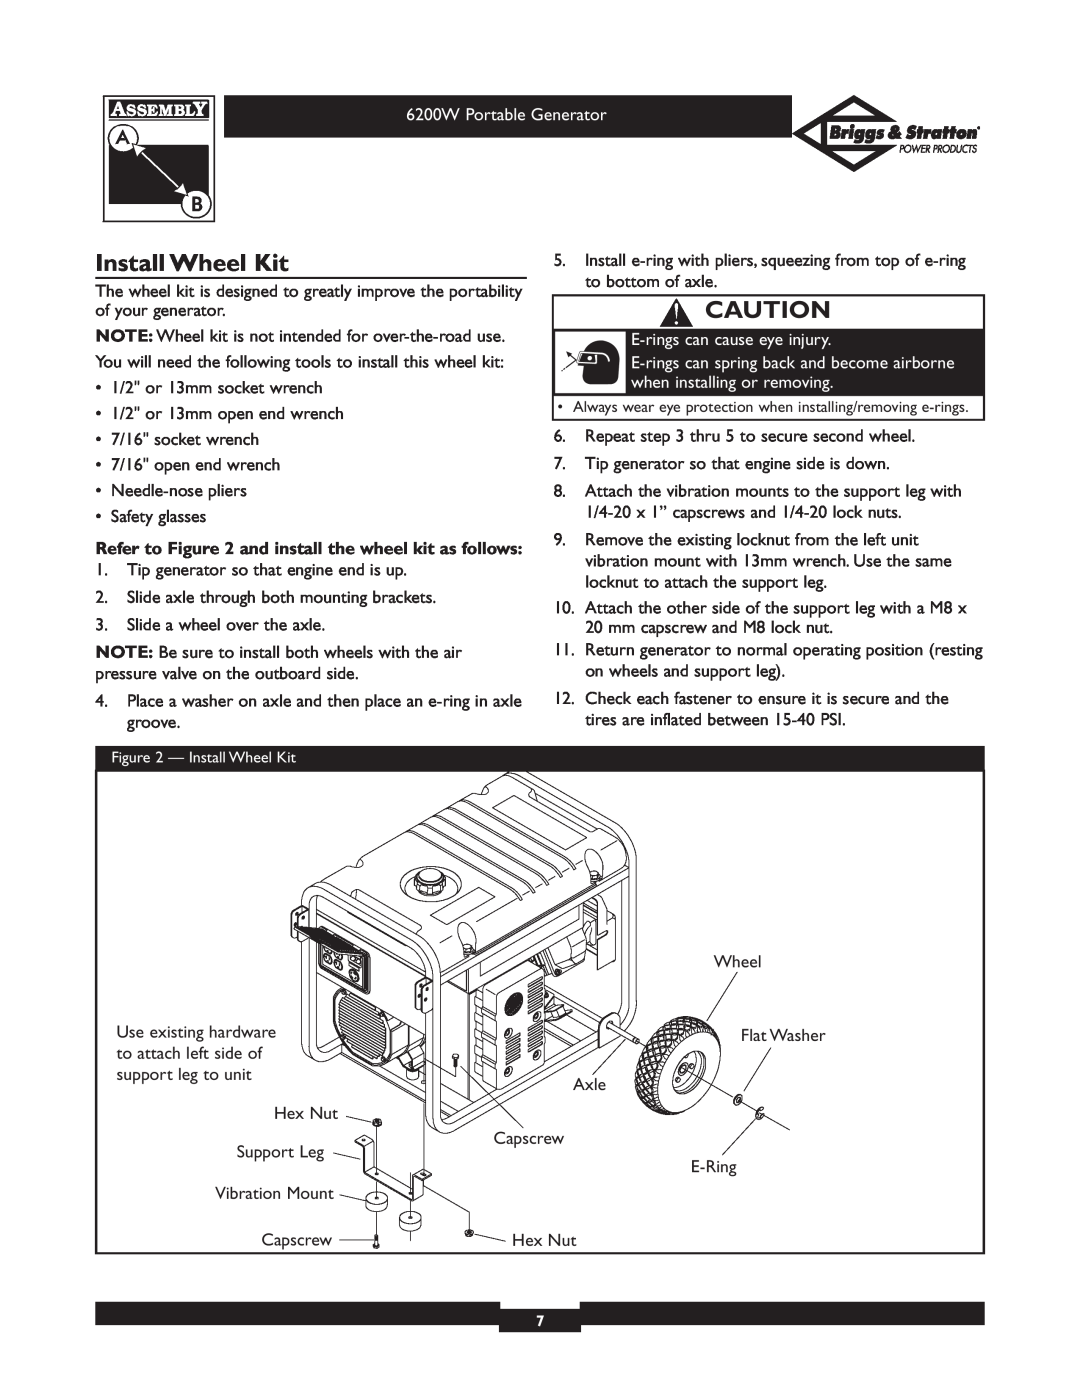 Briggs & Stratton 30211 operating instructions Install Wheel Kit, E-rings can cause eye injury, 6200W Portable Generator 